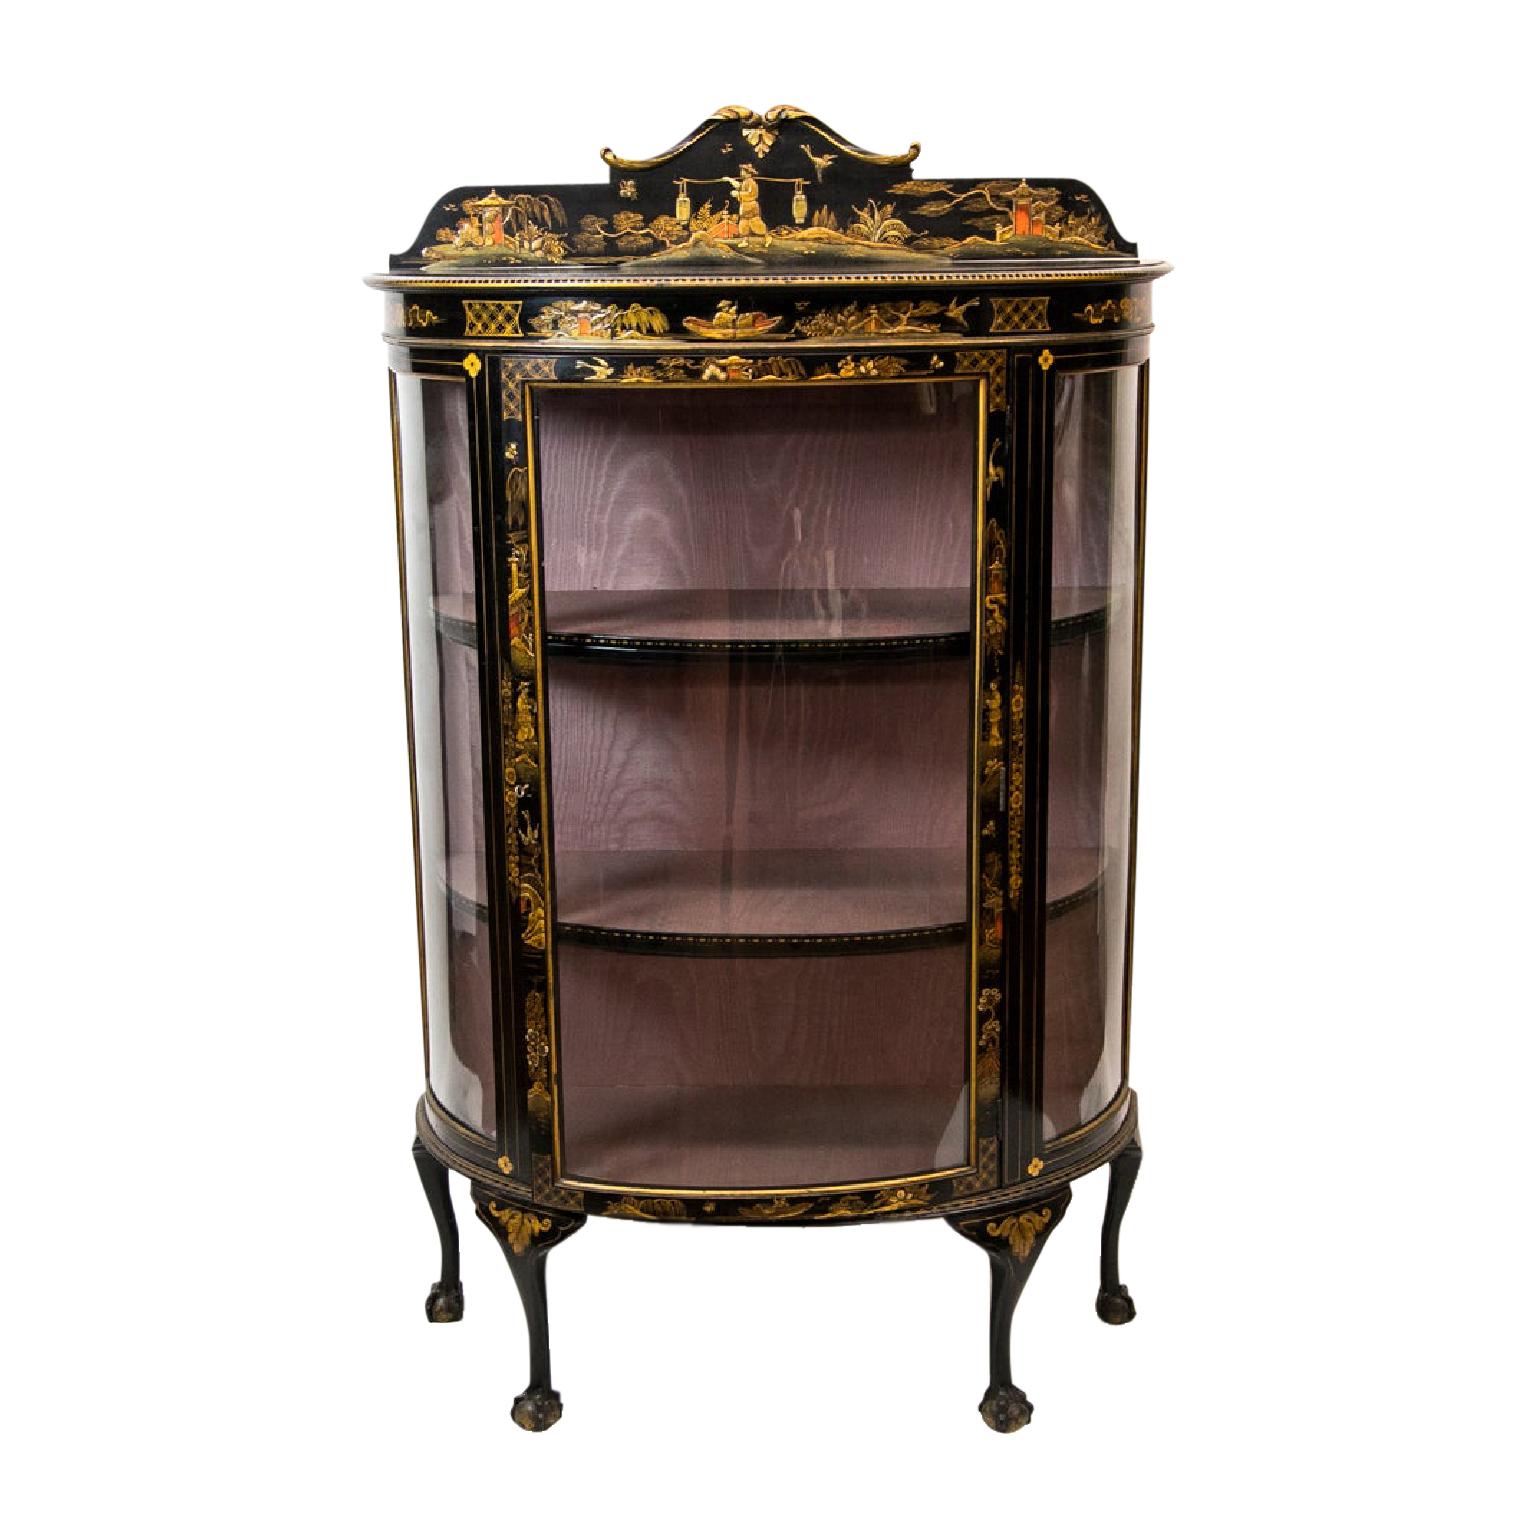  English Chinoiserie Display Case